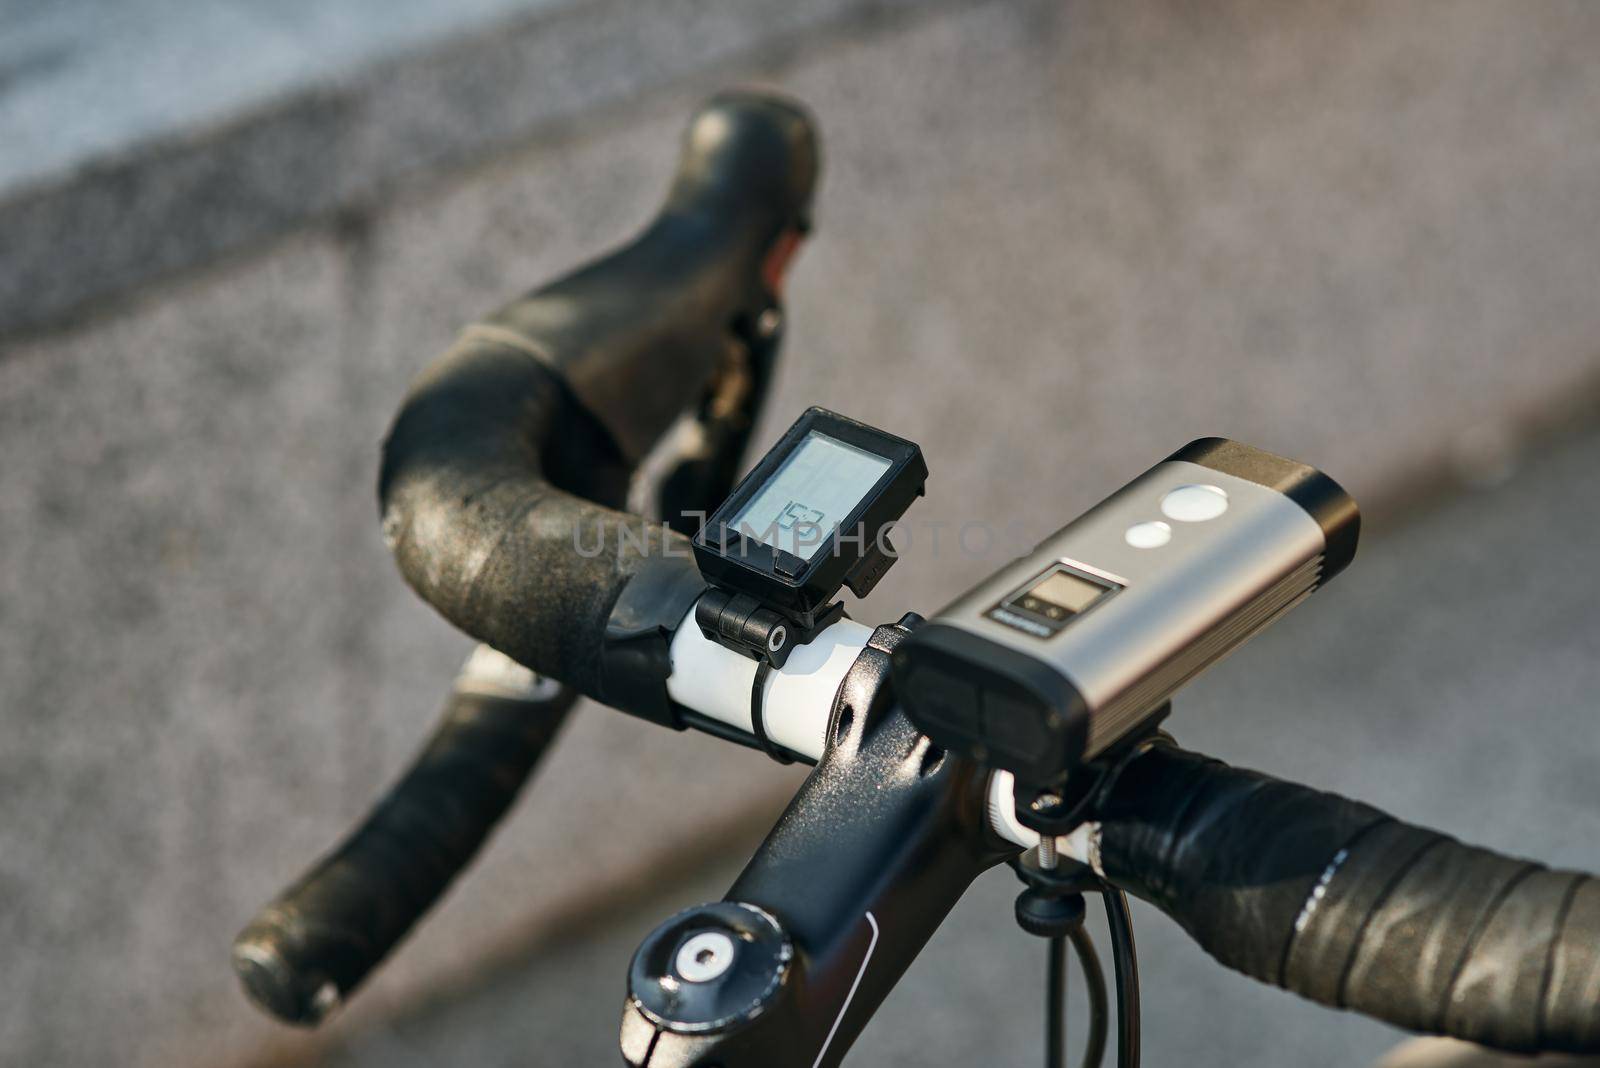 Close up shot of equipment and accessories attached to professional bike handlebar by friendsstock